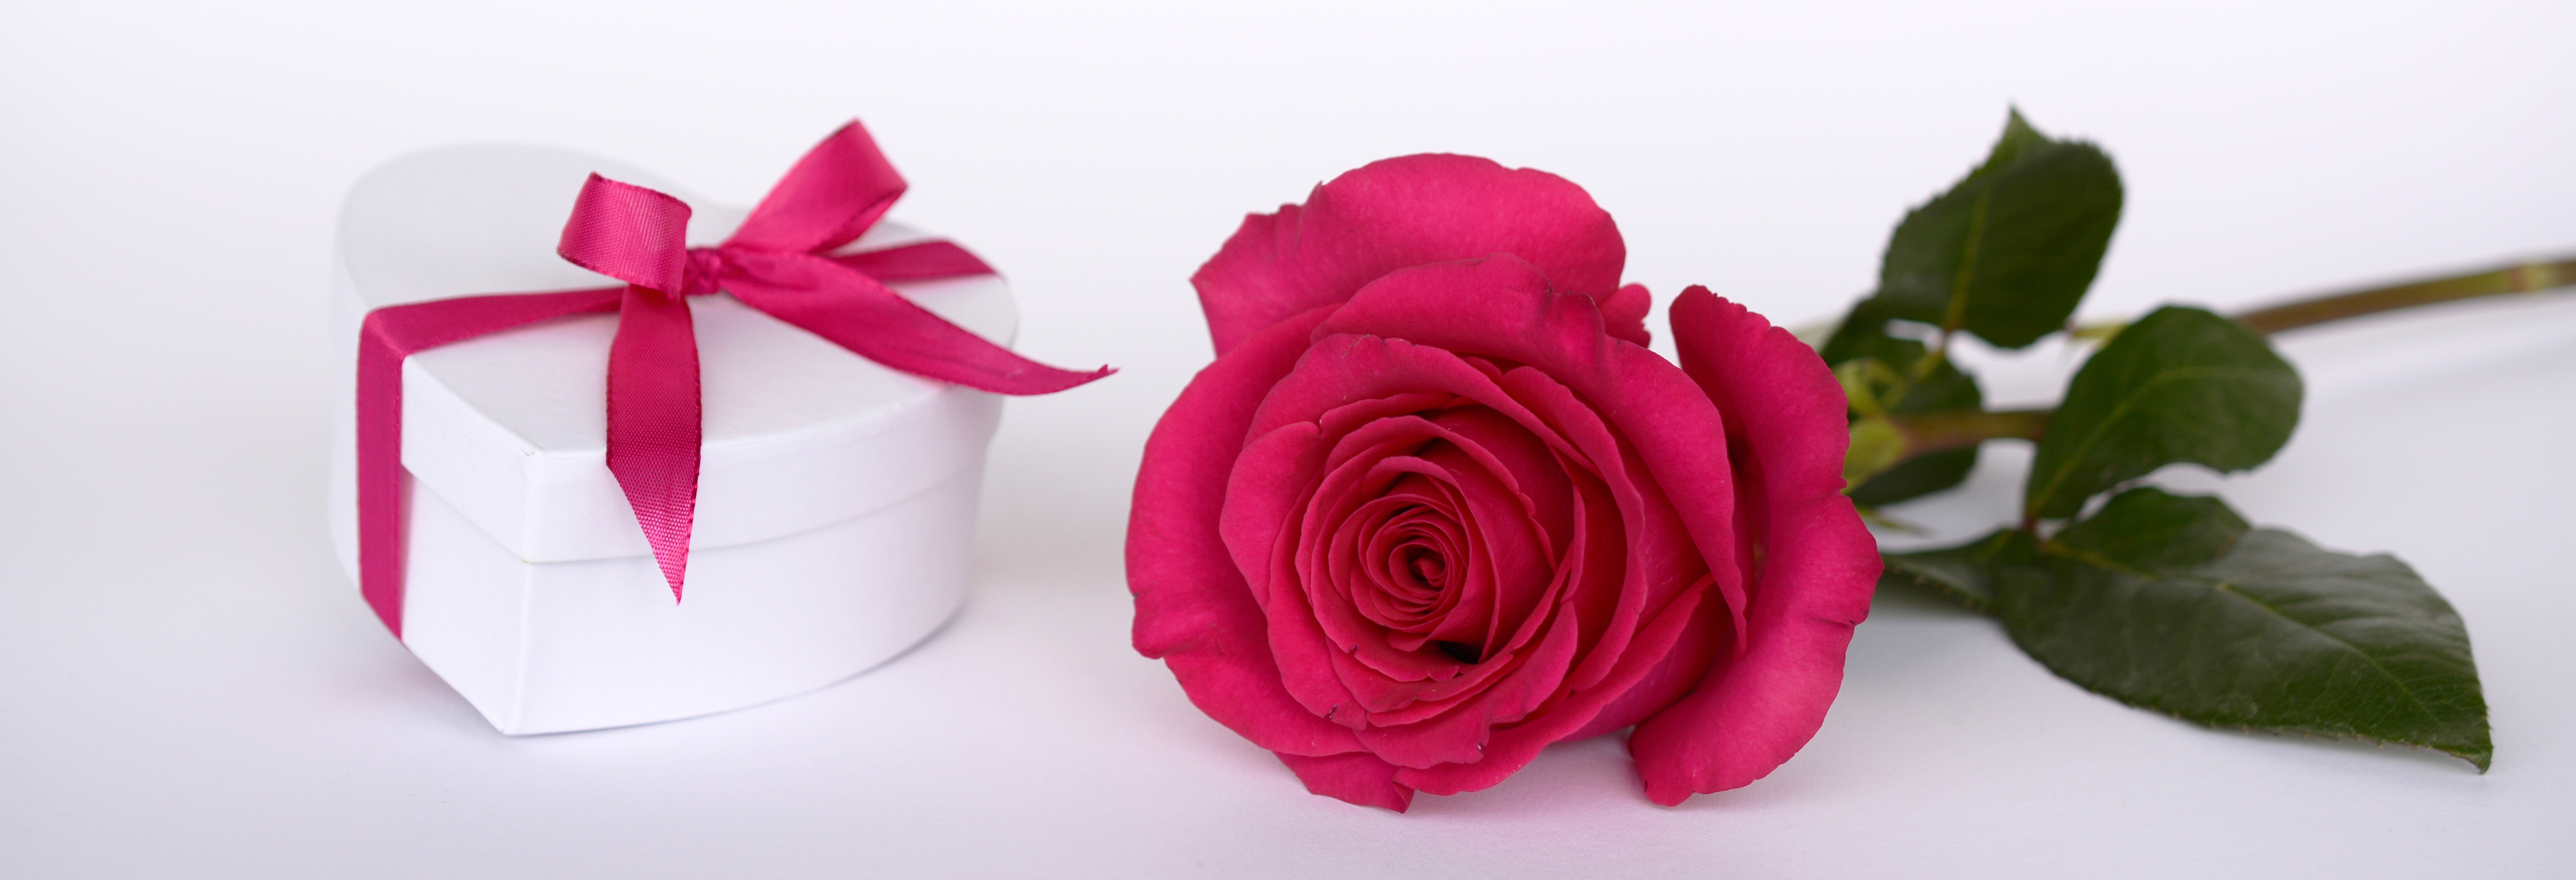 Free photo White heart-shaped box with a pink rose